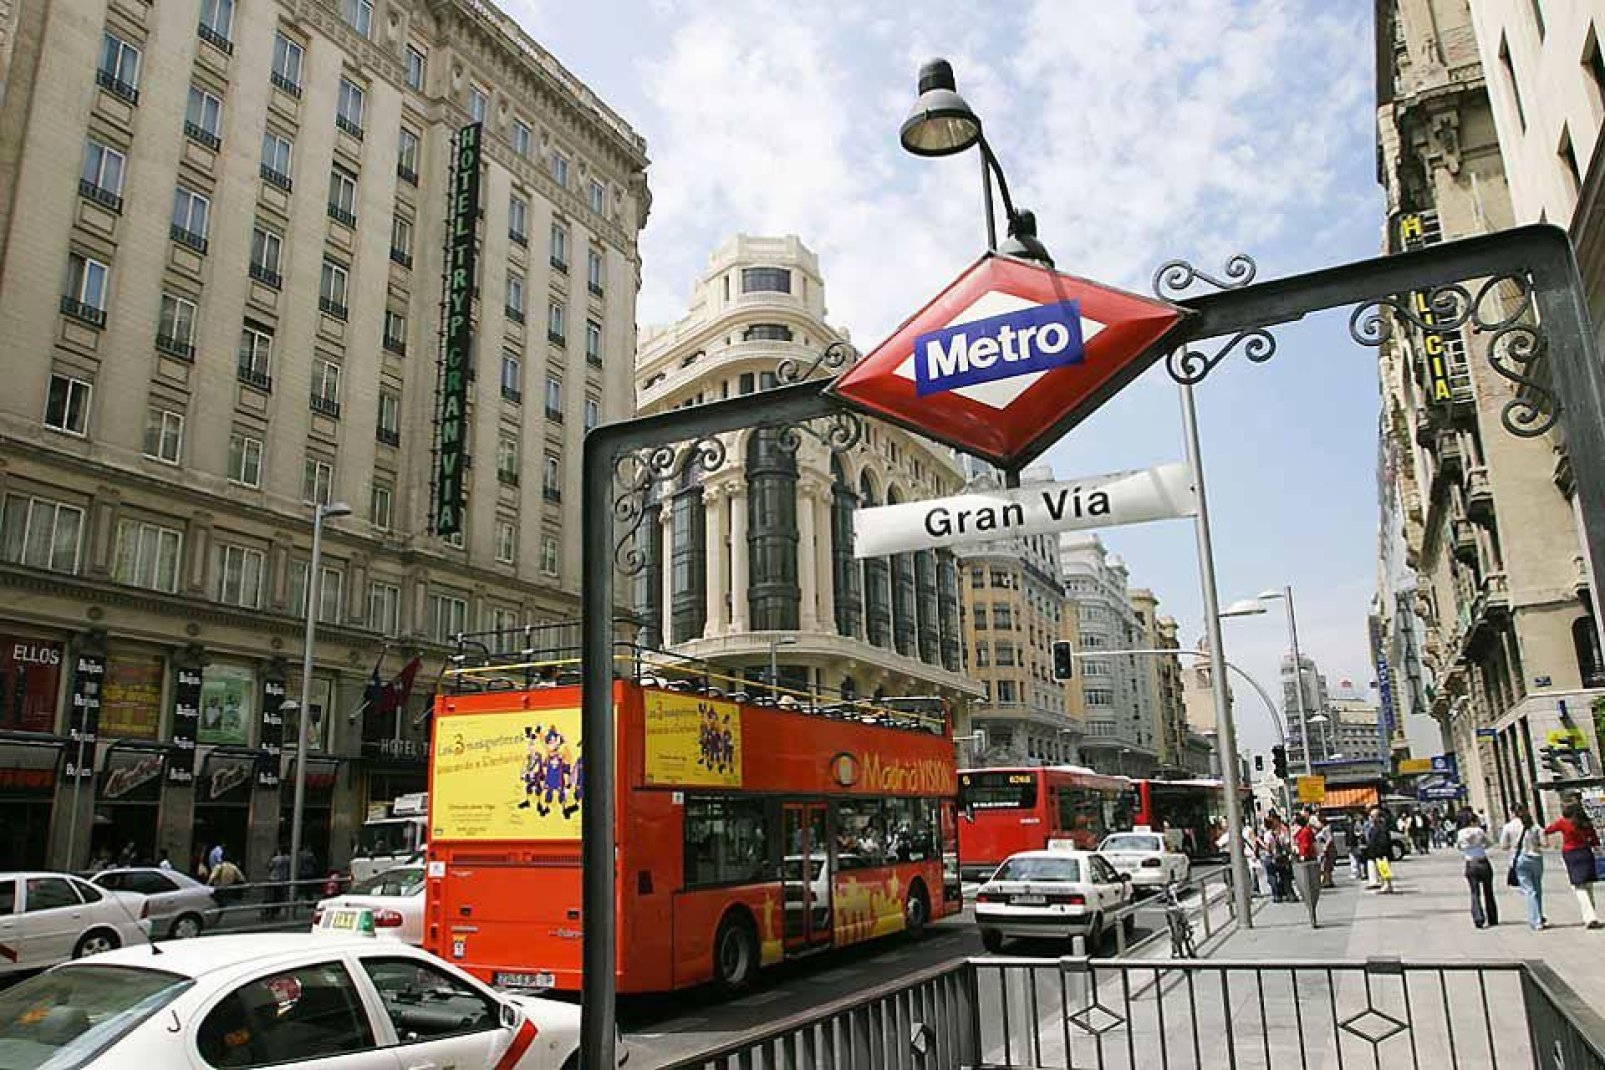 The Gran Via is the main avenue in Madrid. It is full of hotels, cinemas, banks and shopping centres.